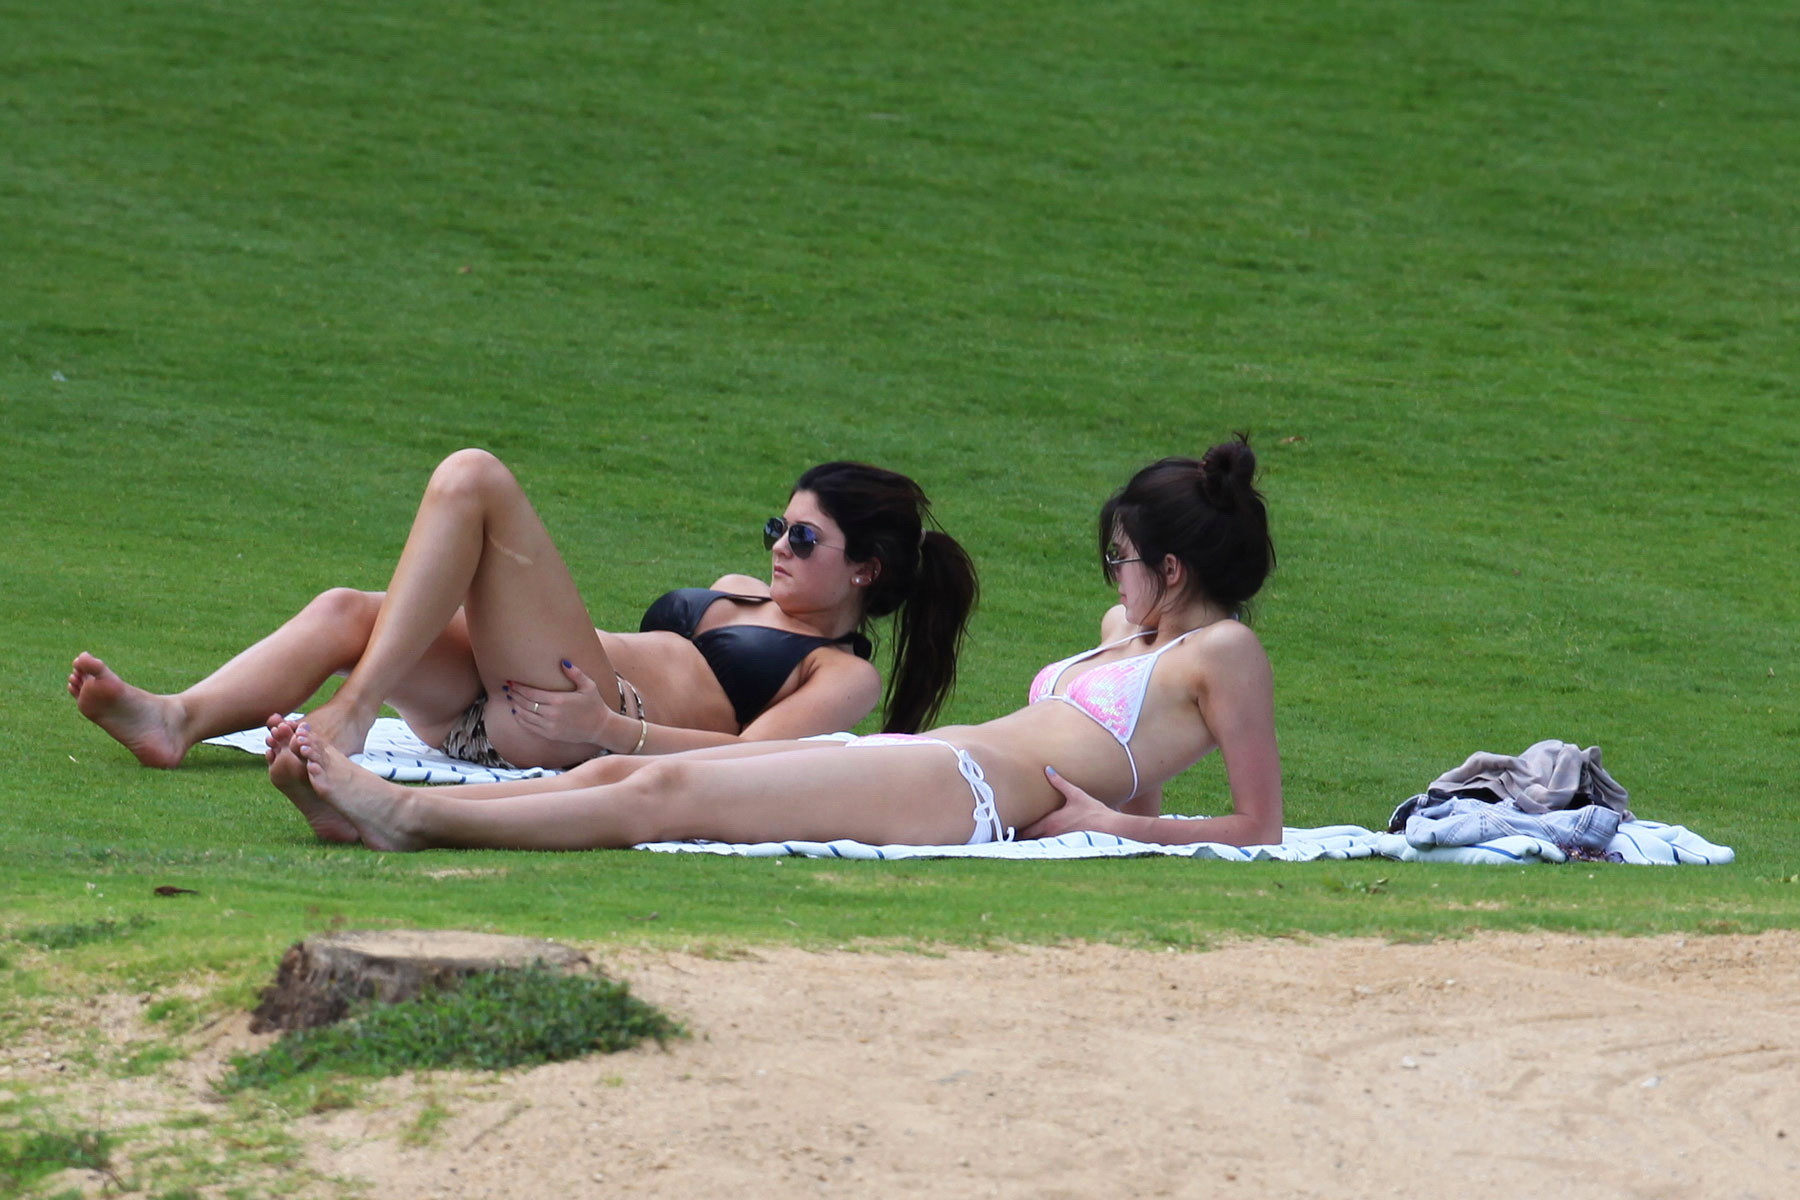 Kylie and Kendall Jenner tanning their hot bodies in skimpy bikini sets on a mea #75174046